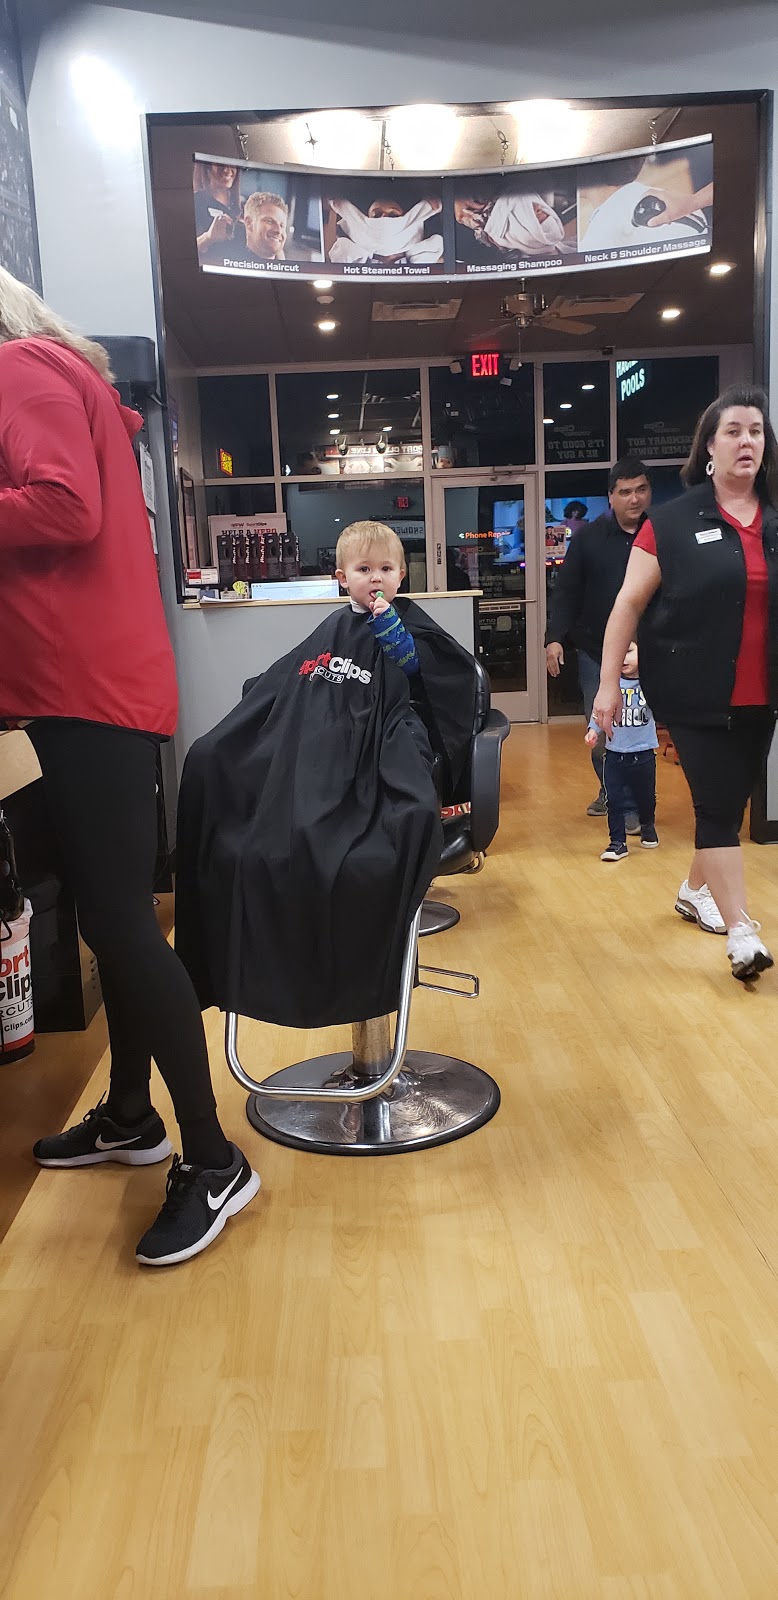 Sport Clips Haircuts of the Shops at Hudson Oaks | 2970 Fort Worth Hwy, Hudson Oaks, TX 76087, USA | Phone: (817) 989-9199